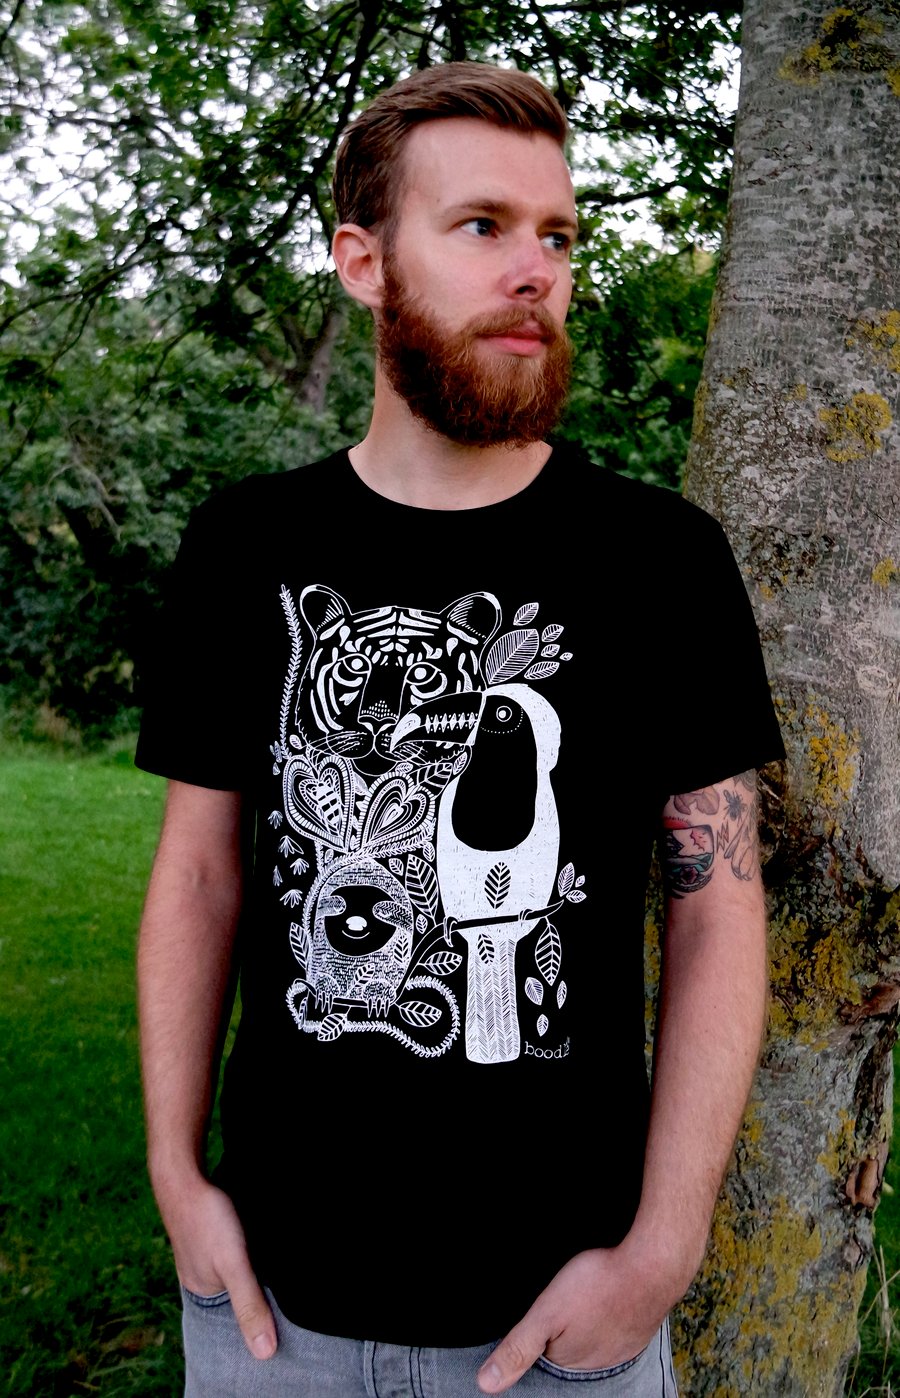 Bamboo Mens Jungle T-shirt featuring a sloth, tiger and toucan.